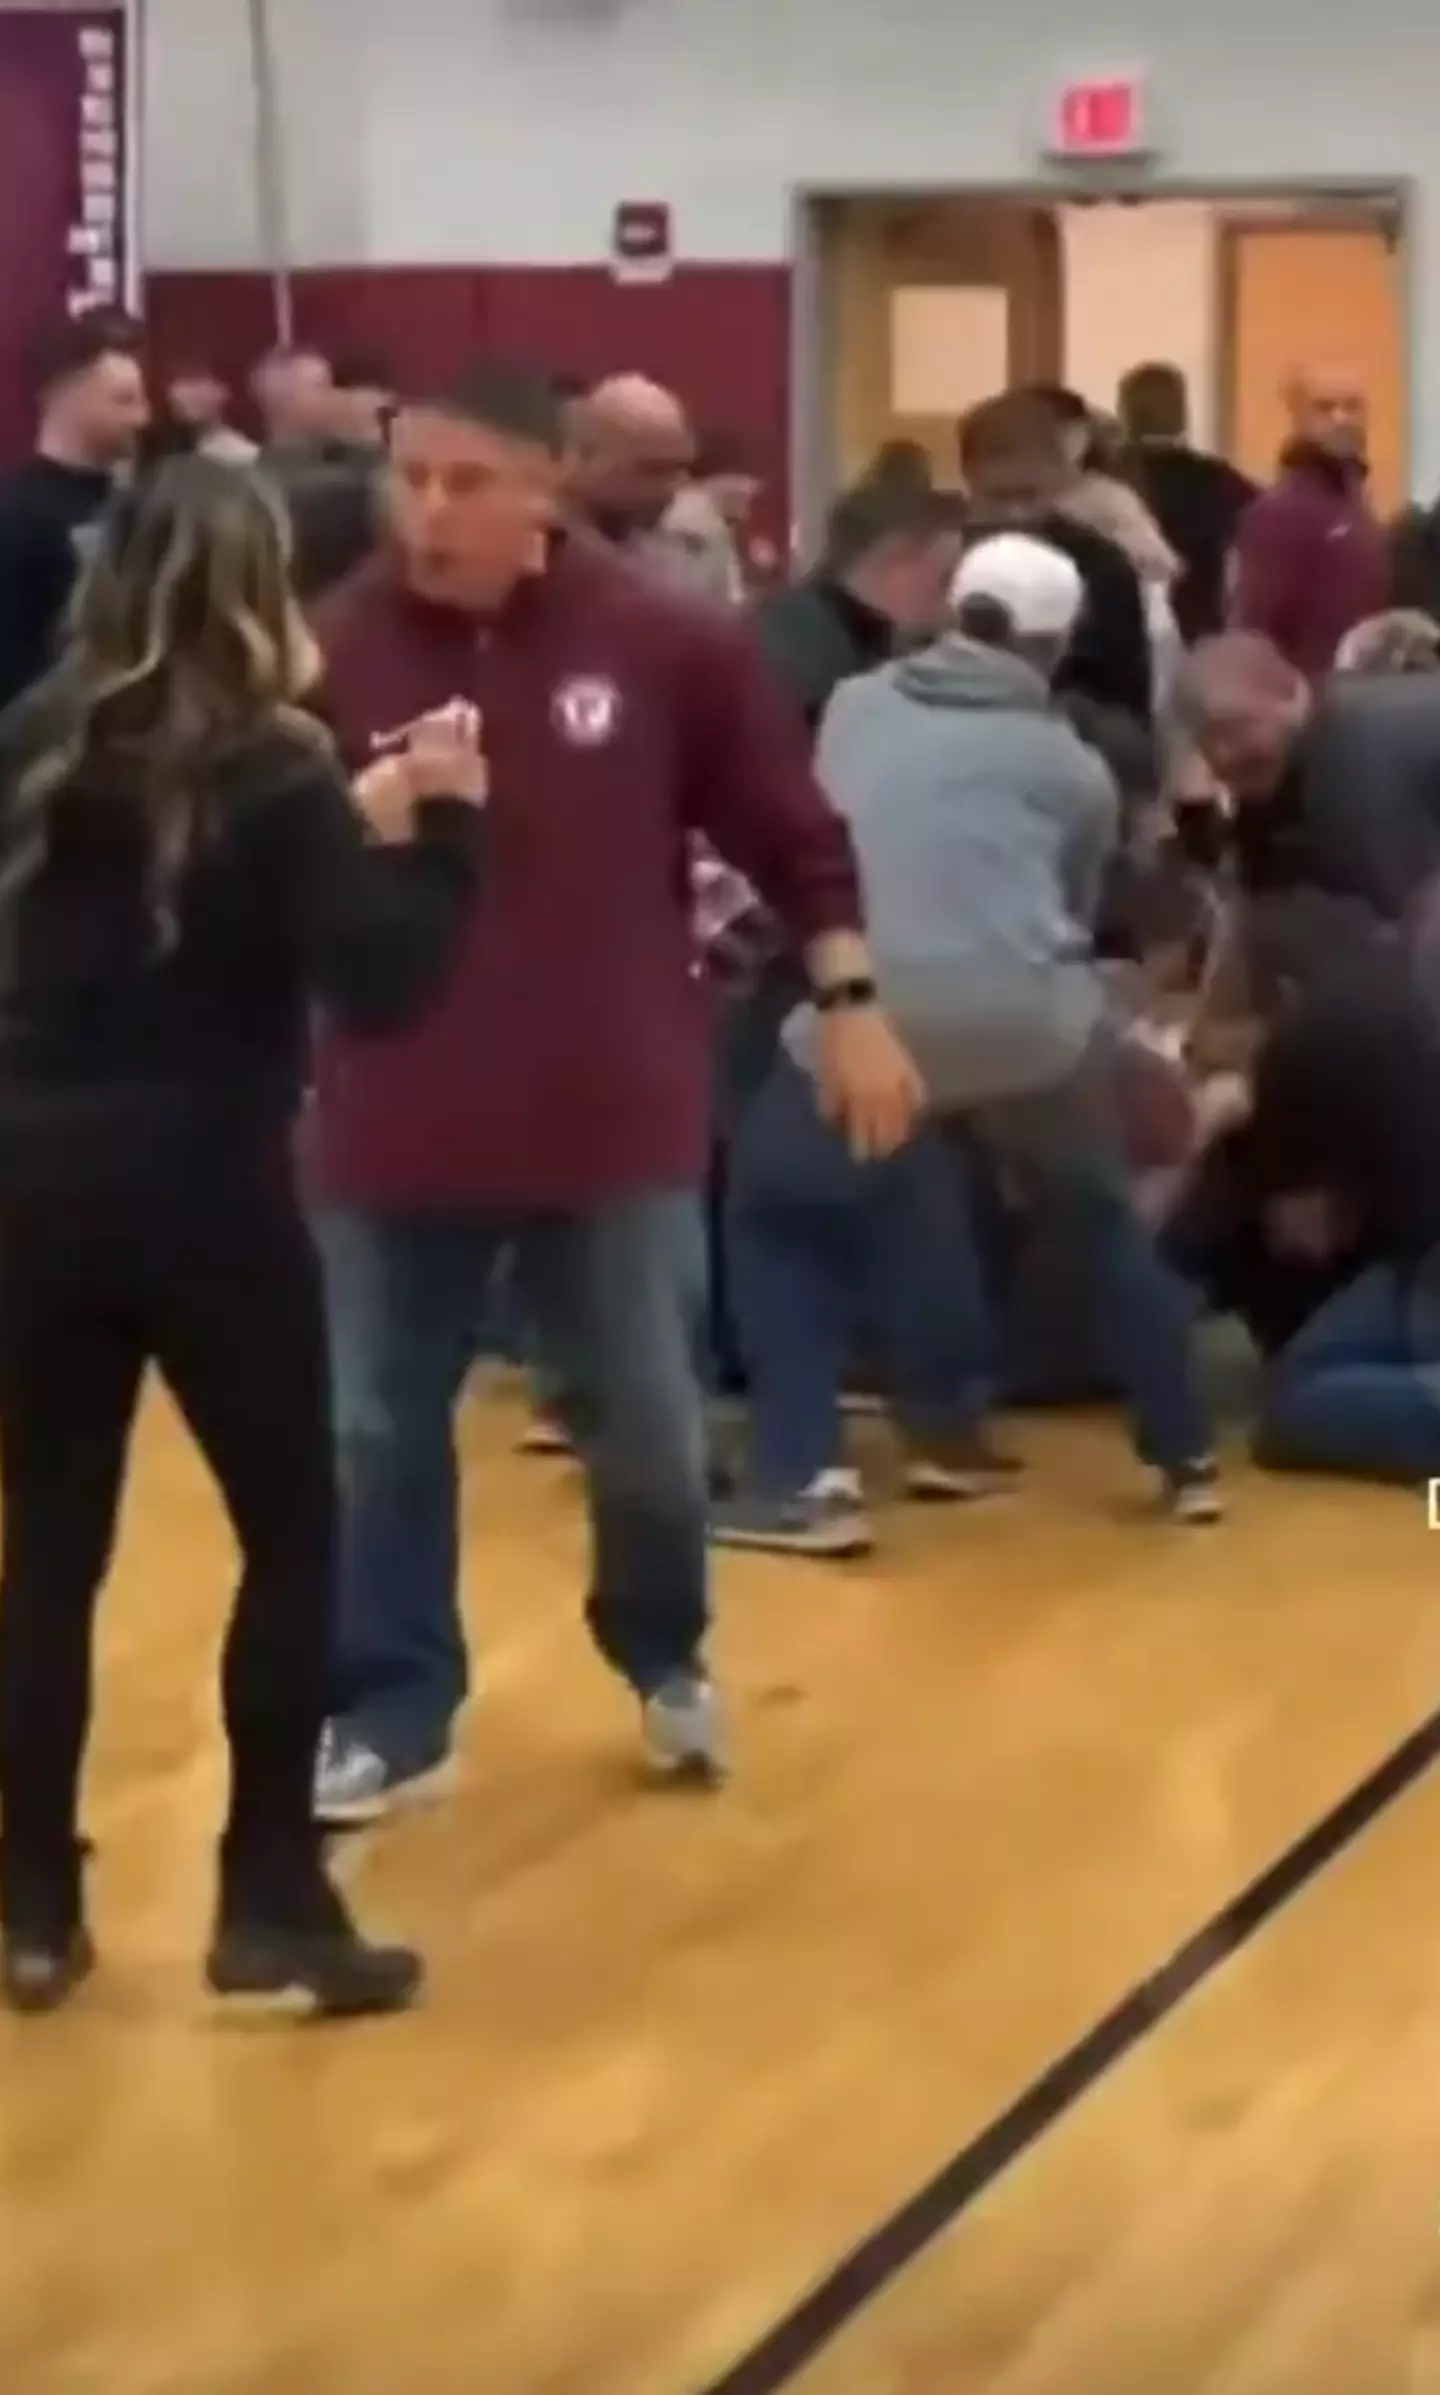 A group of parents were kicking off during the fight.